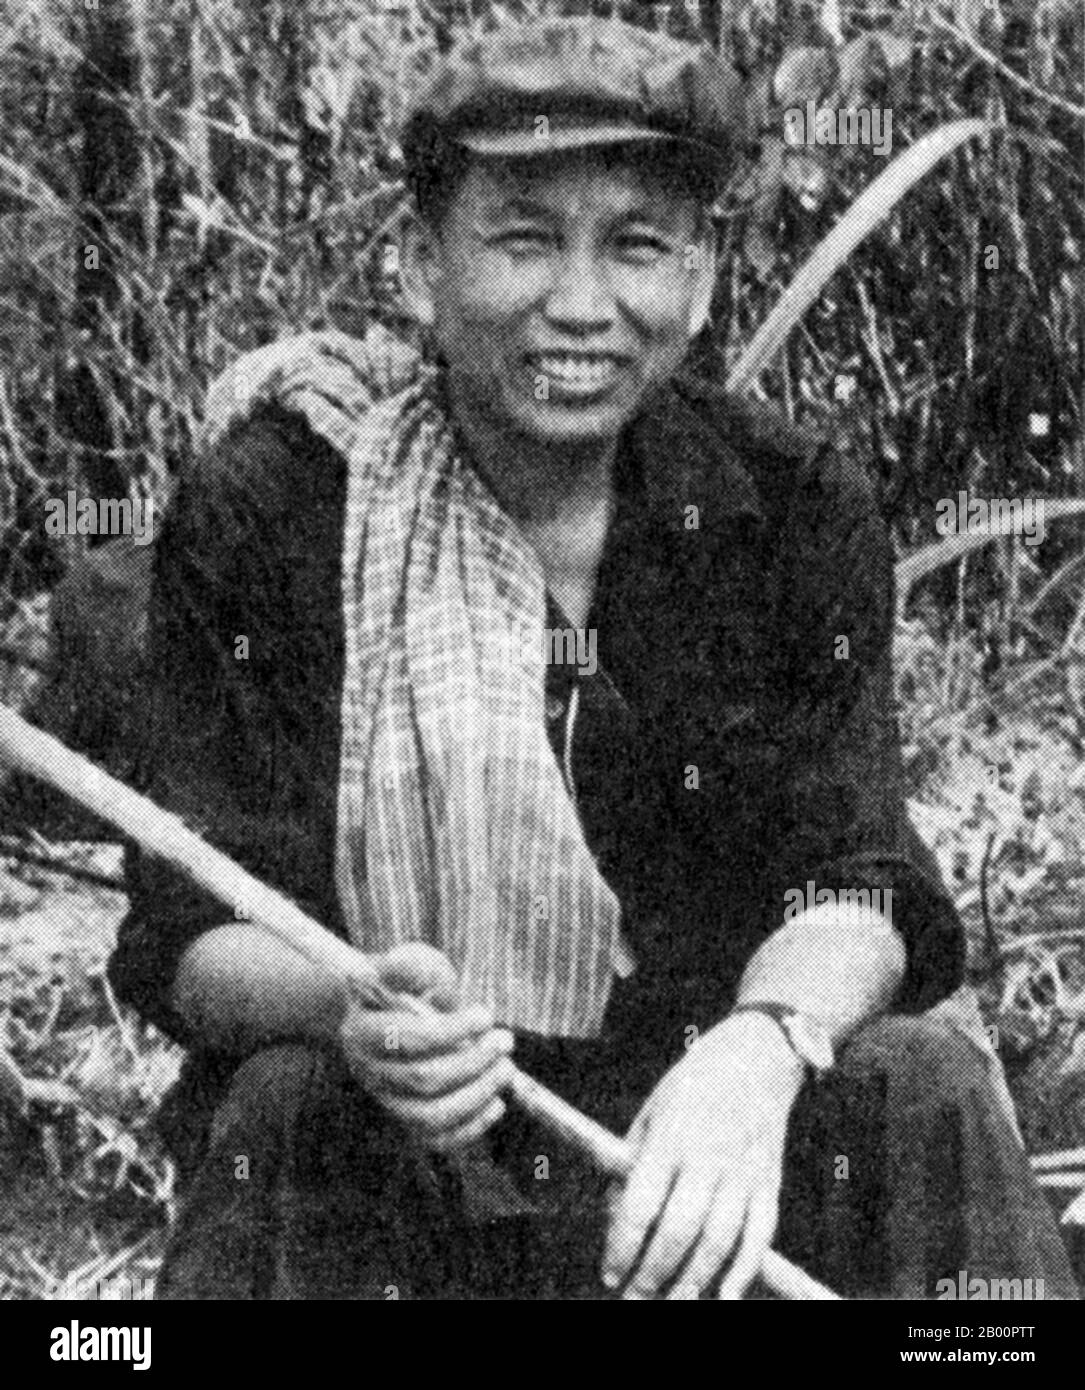 Cambodia: Saloth Sar, alias Pol Pot, in a 1979 DK propaganda photograph taken in western Cambodia.  In a posed propaganda photograph, Pol Pot, recently driven from power by the Vietnamese, sends a message to Hanoi and to the outside world: 'We're still here and represent a viable force'. Stock Photo